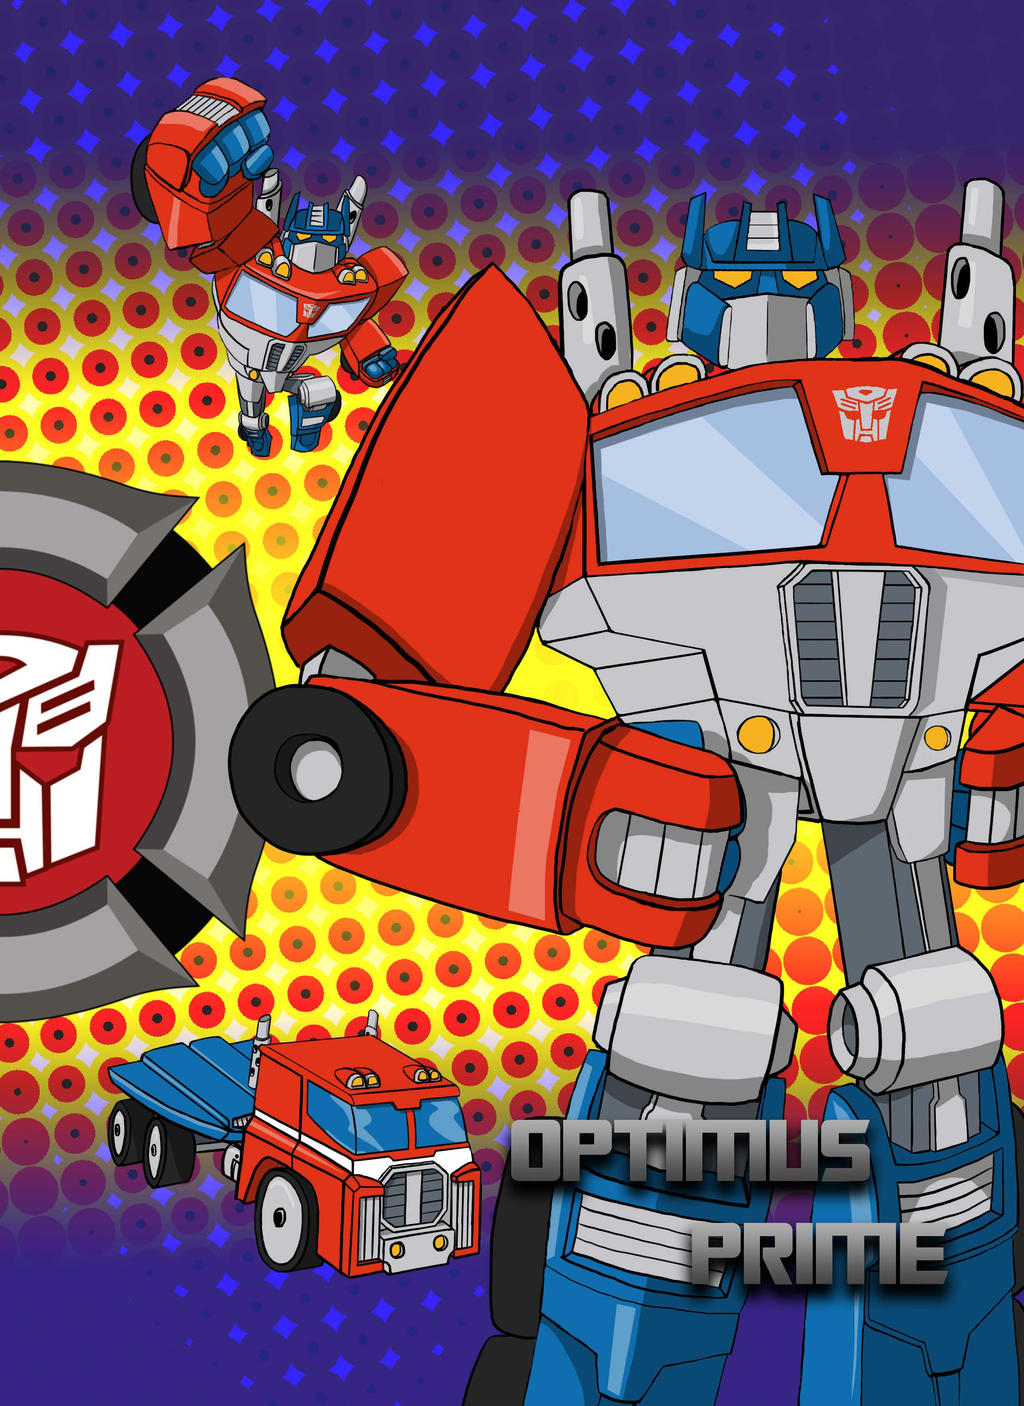 Transformers Bots: Optimus Prime by Theditor on DeviantArt